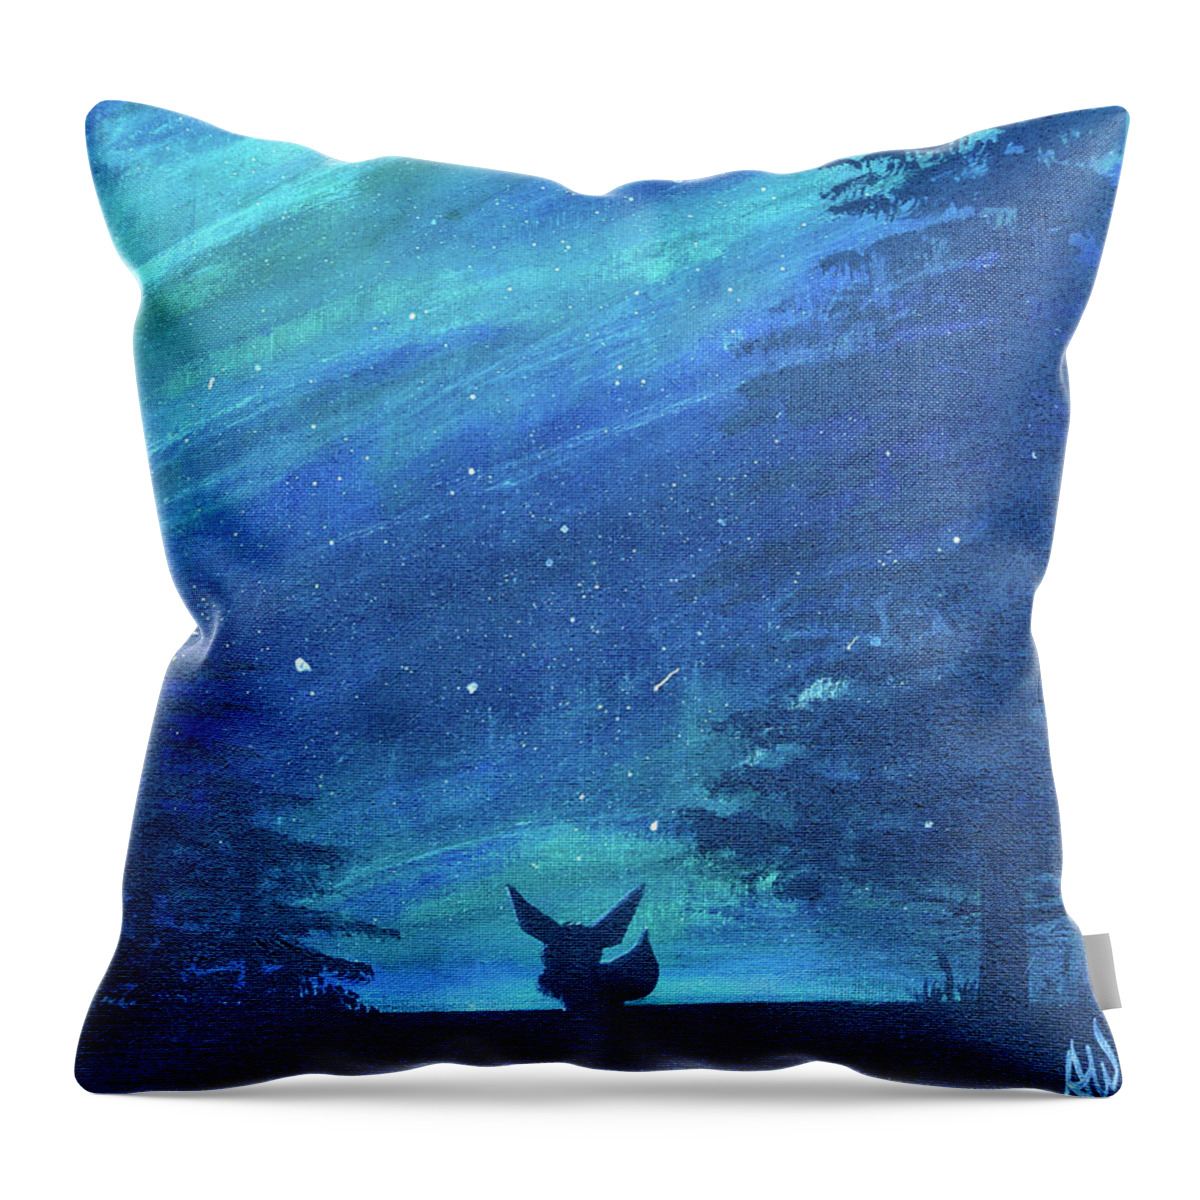 Eevee Throw Pillow featuring the painting Eevee's Sky by Ashley Wright